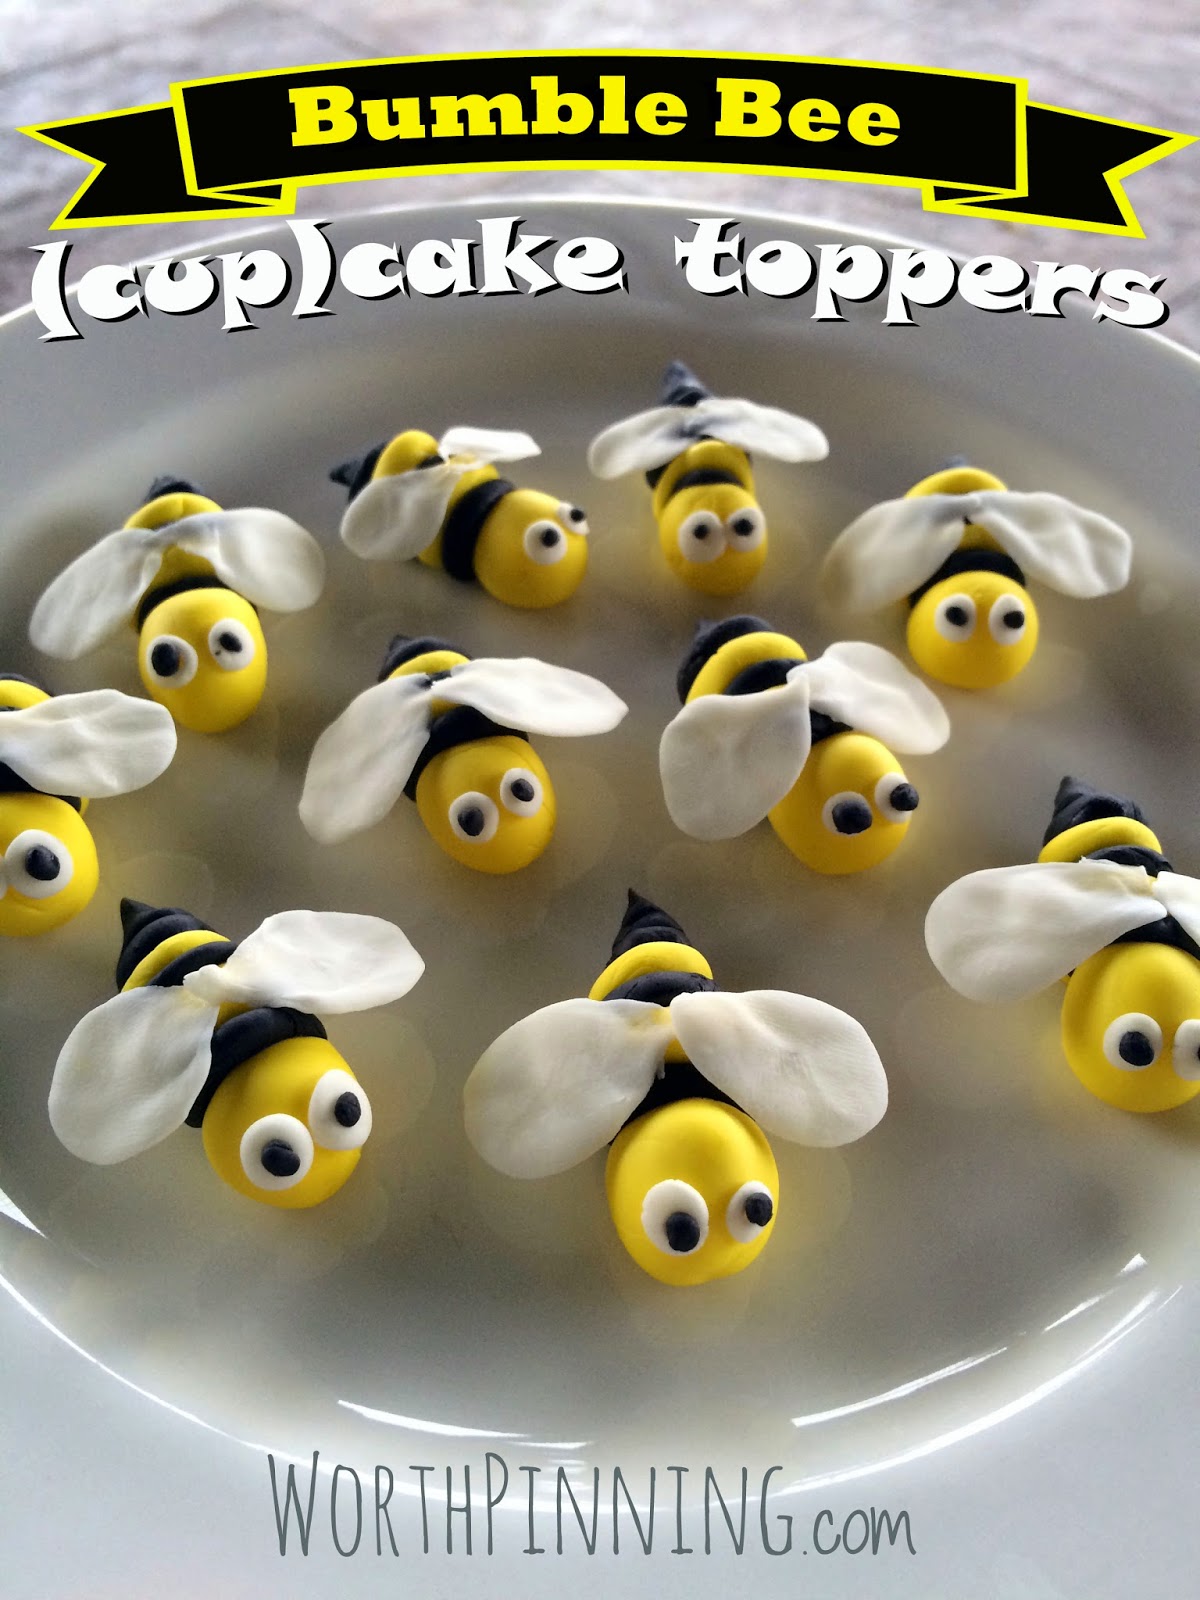 Worth Pinning Bumble Bee Cake Or Cupcake Toppers